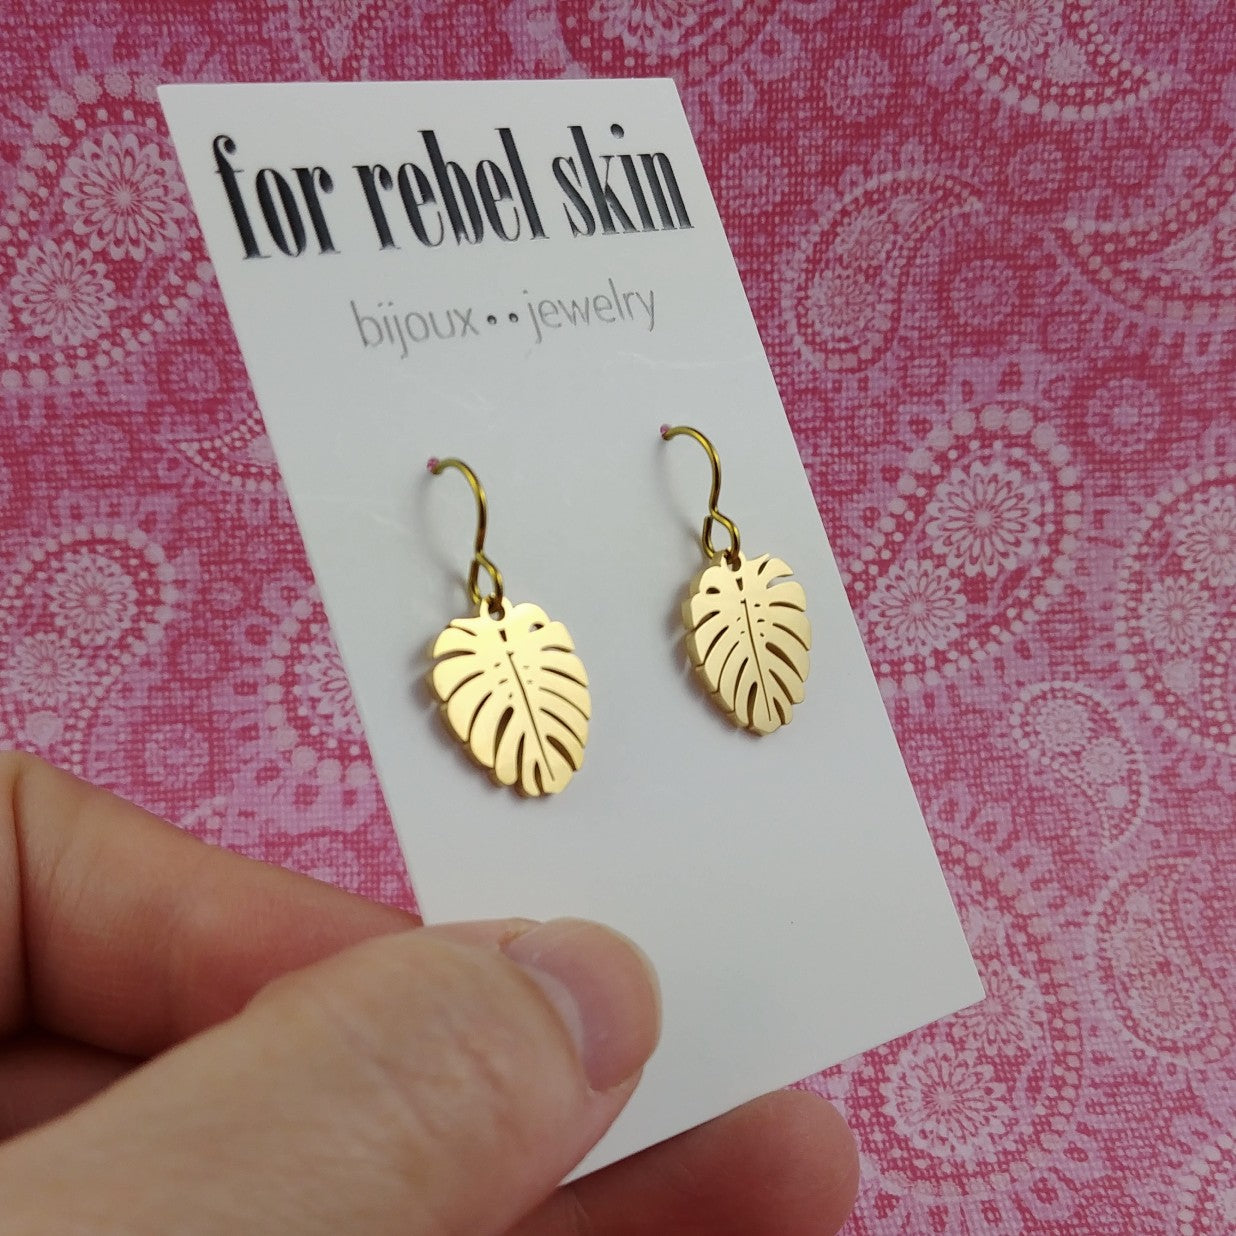 Dainty gold palm leaf earrings - Niobium and stainless steel